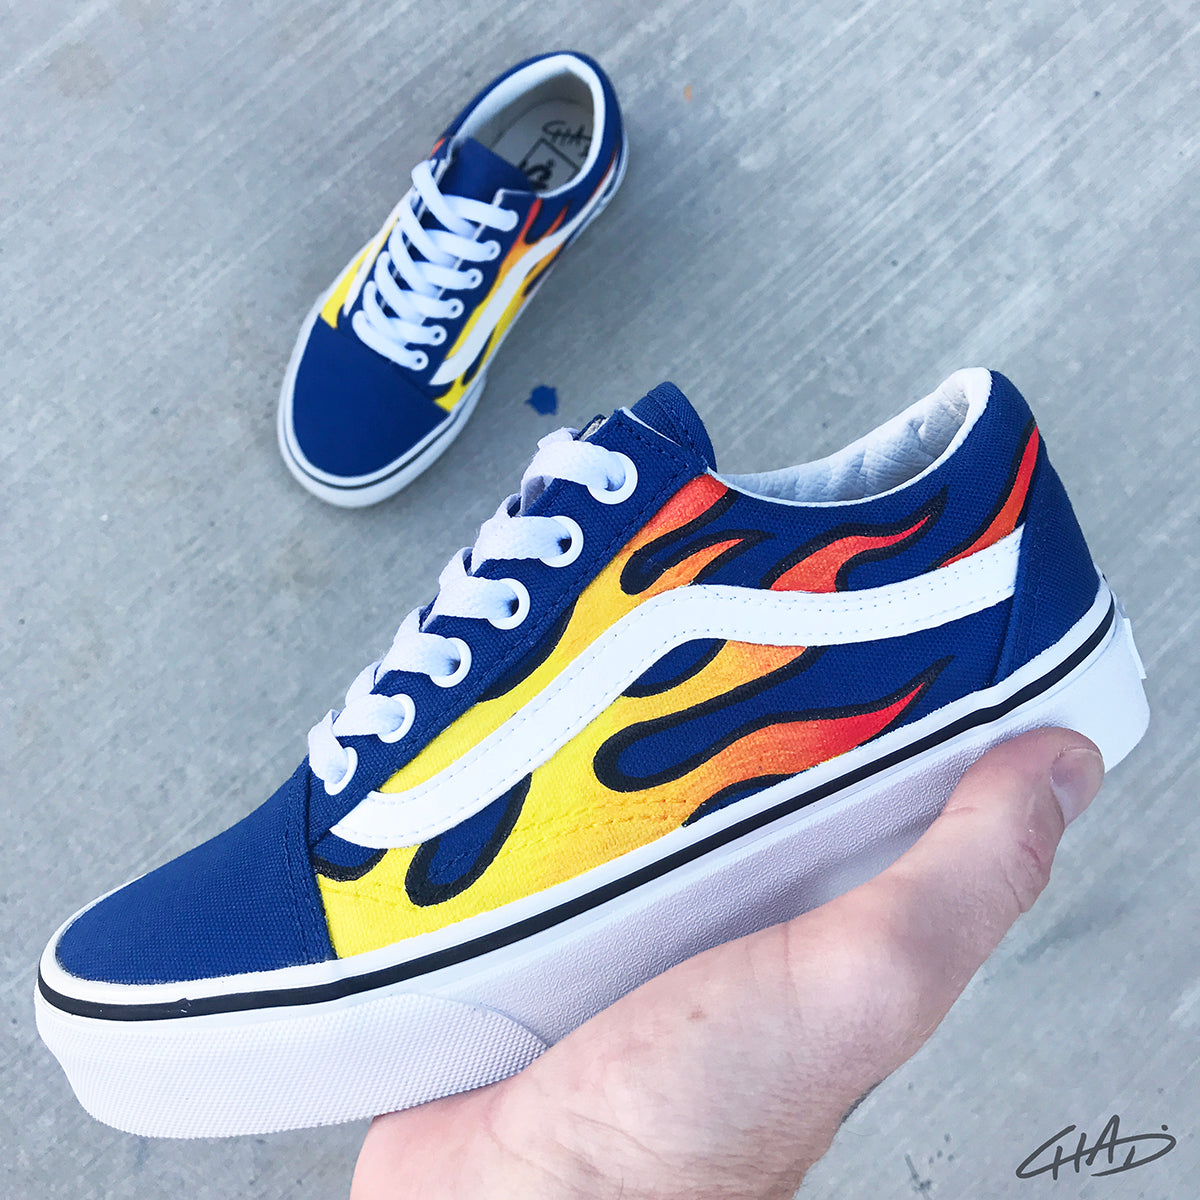 vans shoes with flames